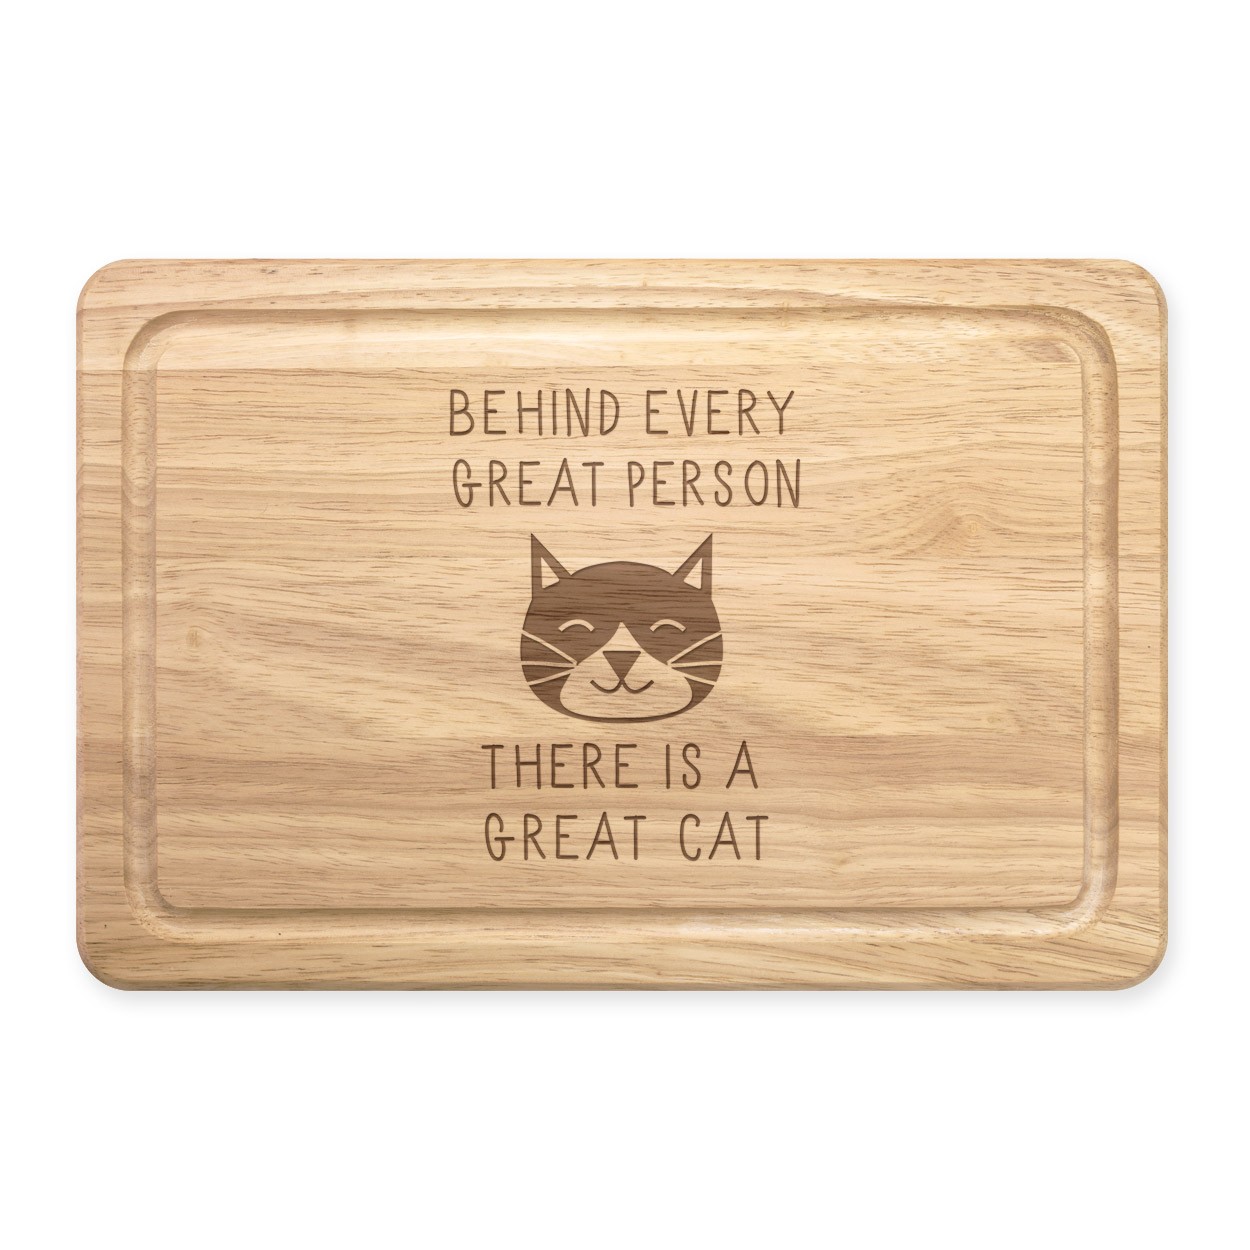 Behind Every Great Person Is A Great Cat Rectangular Wooden Chopping Board